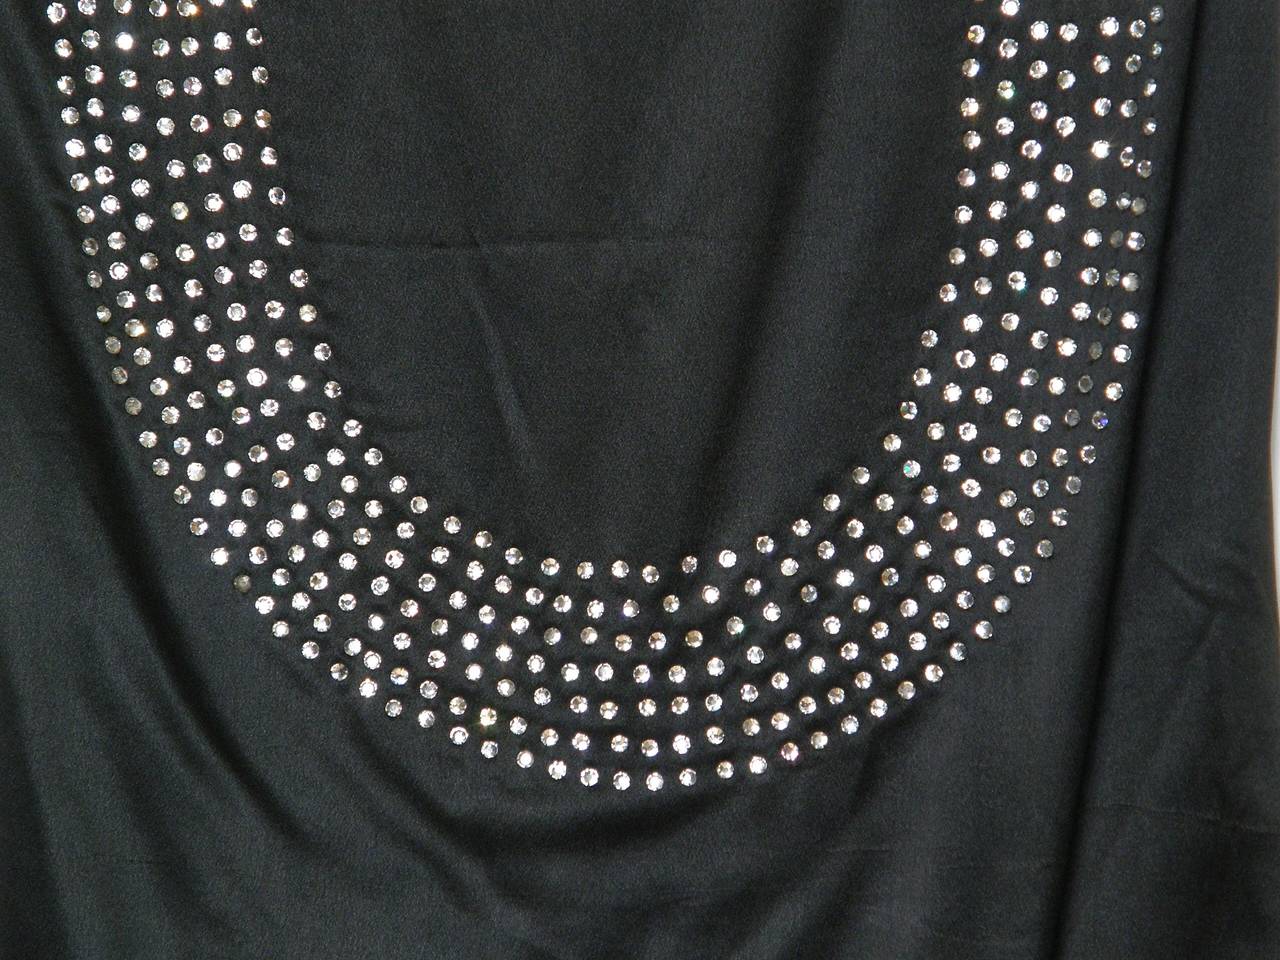 Black Satin Art Deco Style Evening Blouse with Rhinestones and Beading For Sale 2